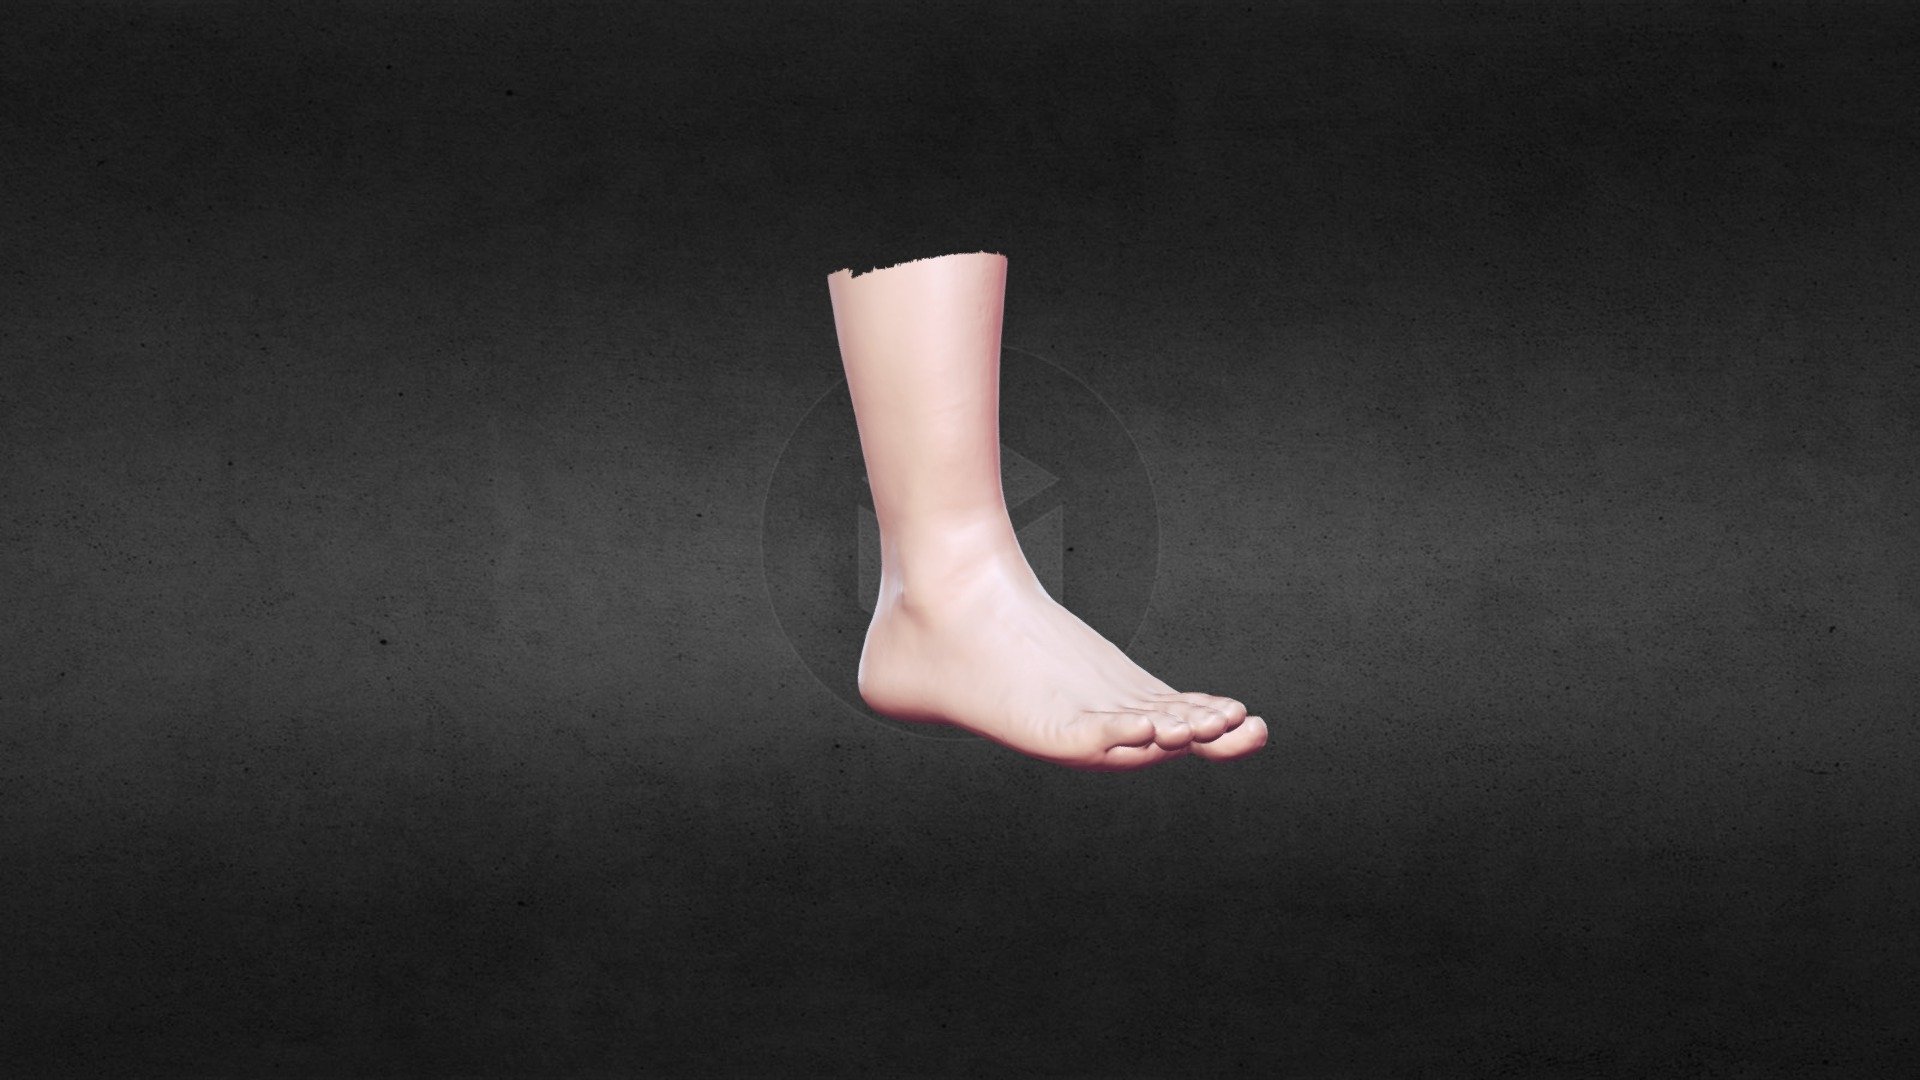 Color Scanning of Foot